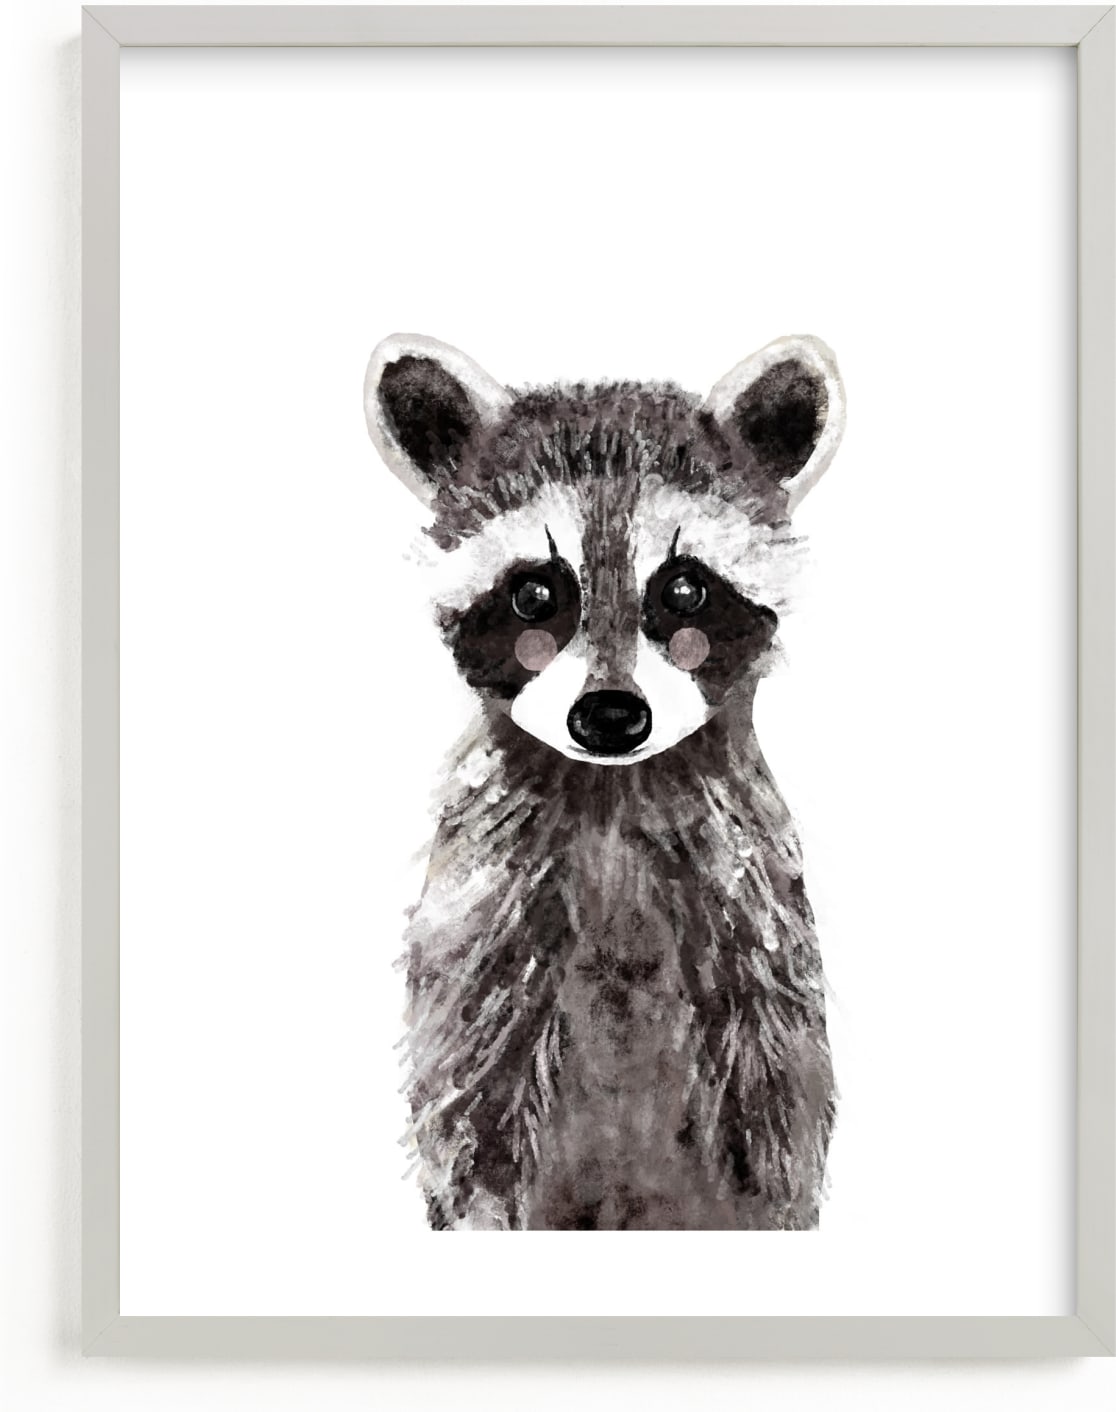 This is a brown, grey art by Cass Loh called Baby Raccoon.